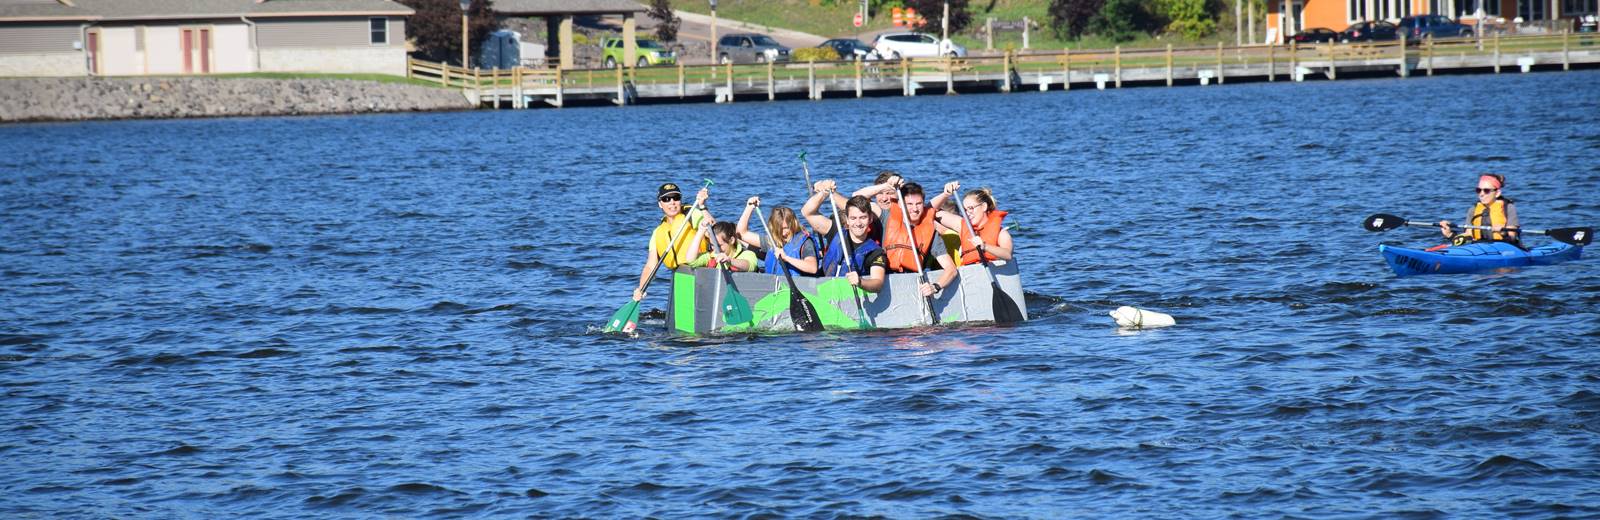 Pavlis students competing in Michigan Tech's Homecoming cardboard boat race